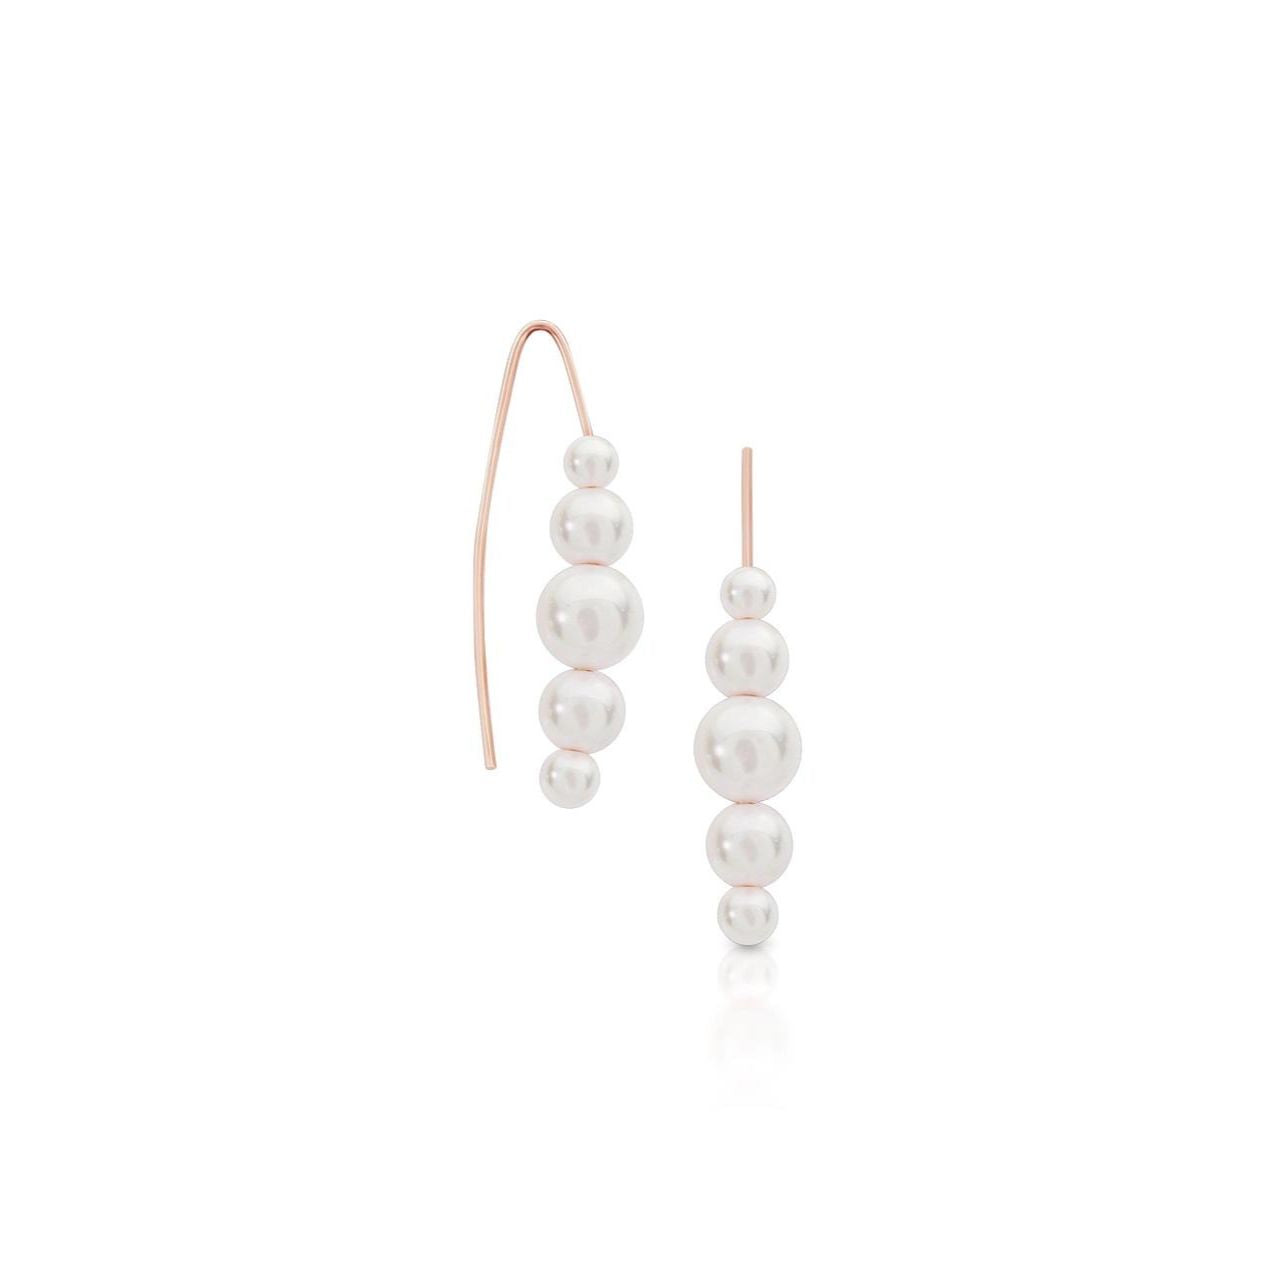 Romi Dublin Rose Gold Pearl Drop Earrings  Simple and understated this collection has a contemporary and sleek look that will allow you to accessorise with any outfit.